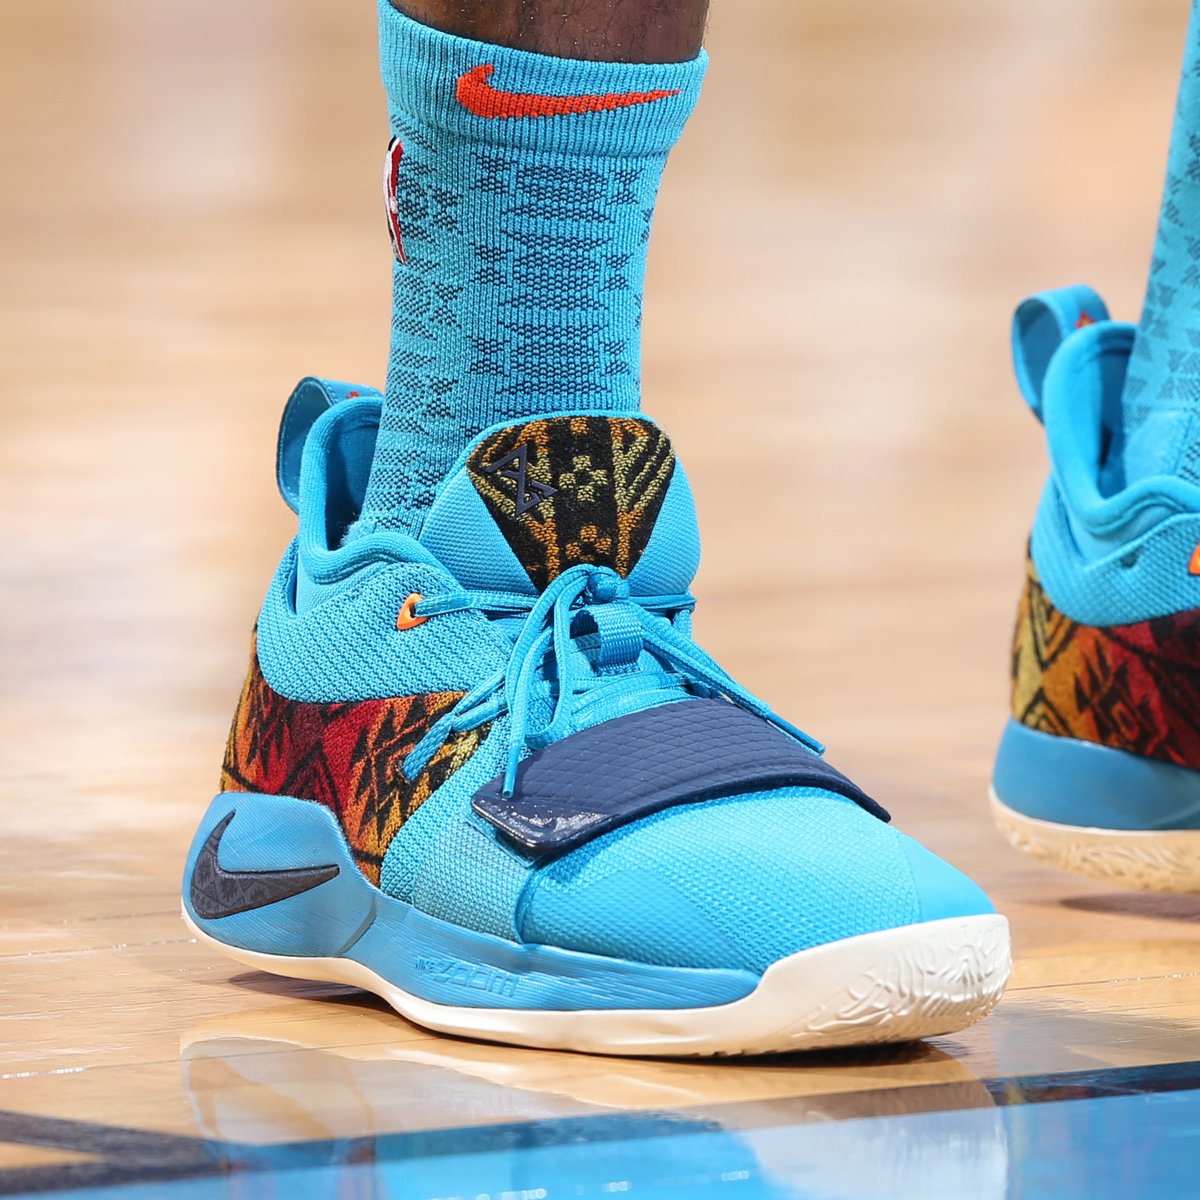 clérigo Del Sur Contradicción SOLELINKS on Twitter: "Ad: Grab the NEW Nike PG 2.5 'Pendleton' at $96 +  FREE shipping, use code HURRY20 =&gt; https://t.co/AL1MaGsTvd  https://t.co/4Z6vgr2xP3" / Twitter